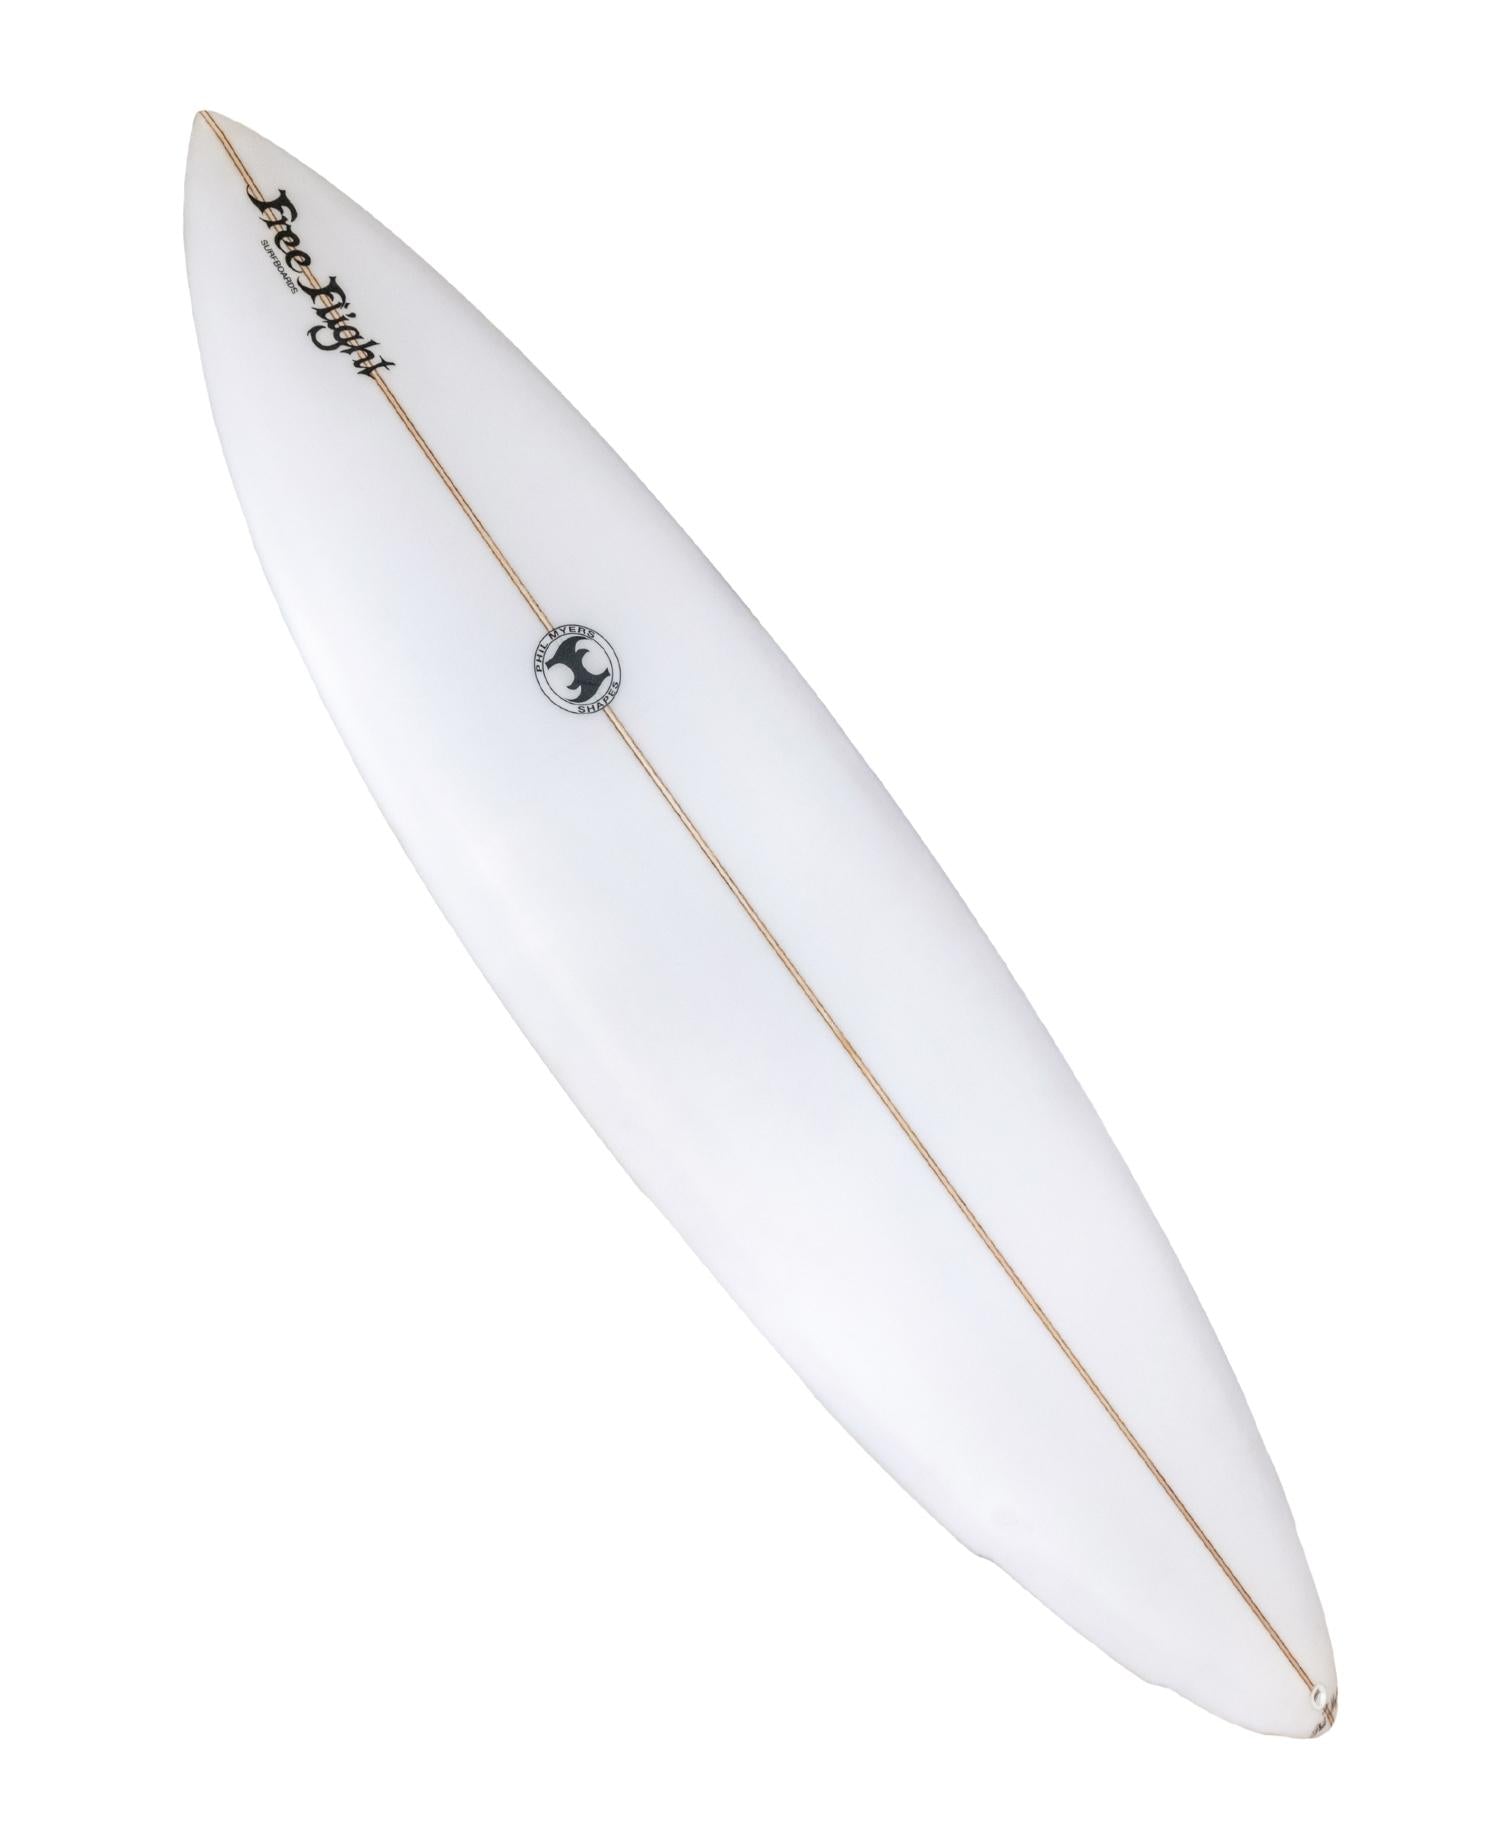 Free Flight Phil Myers 'COL SMITH' 6 Channel Single fin Surfboard